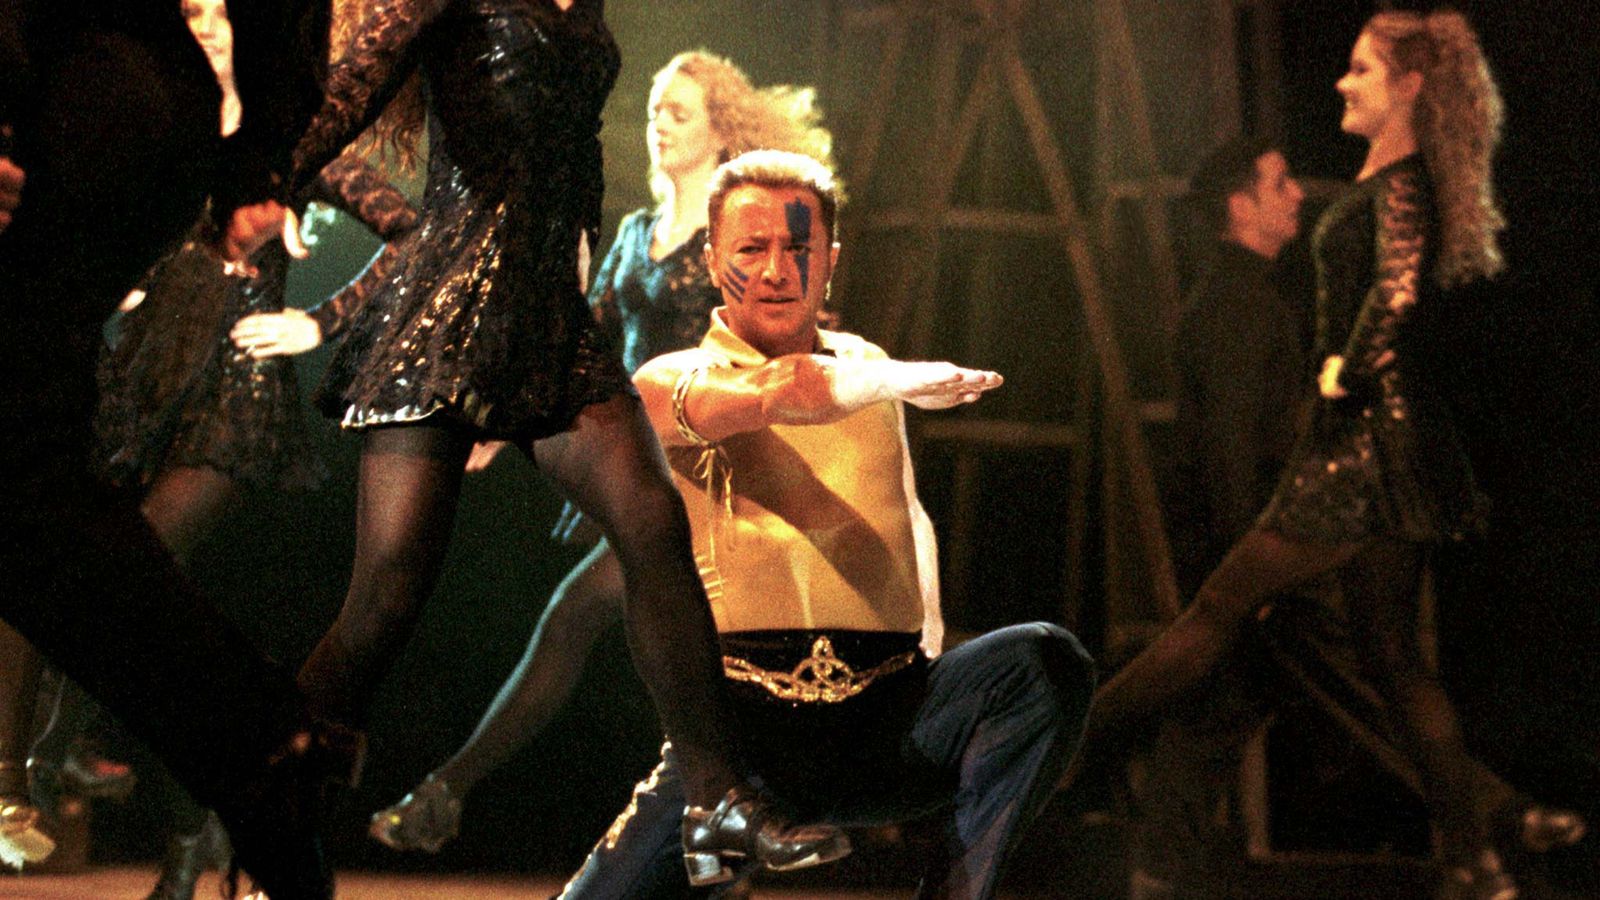 Michael Flatley: Lord Of The Dance creator has 'aggressive form of cancer'